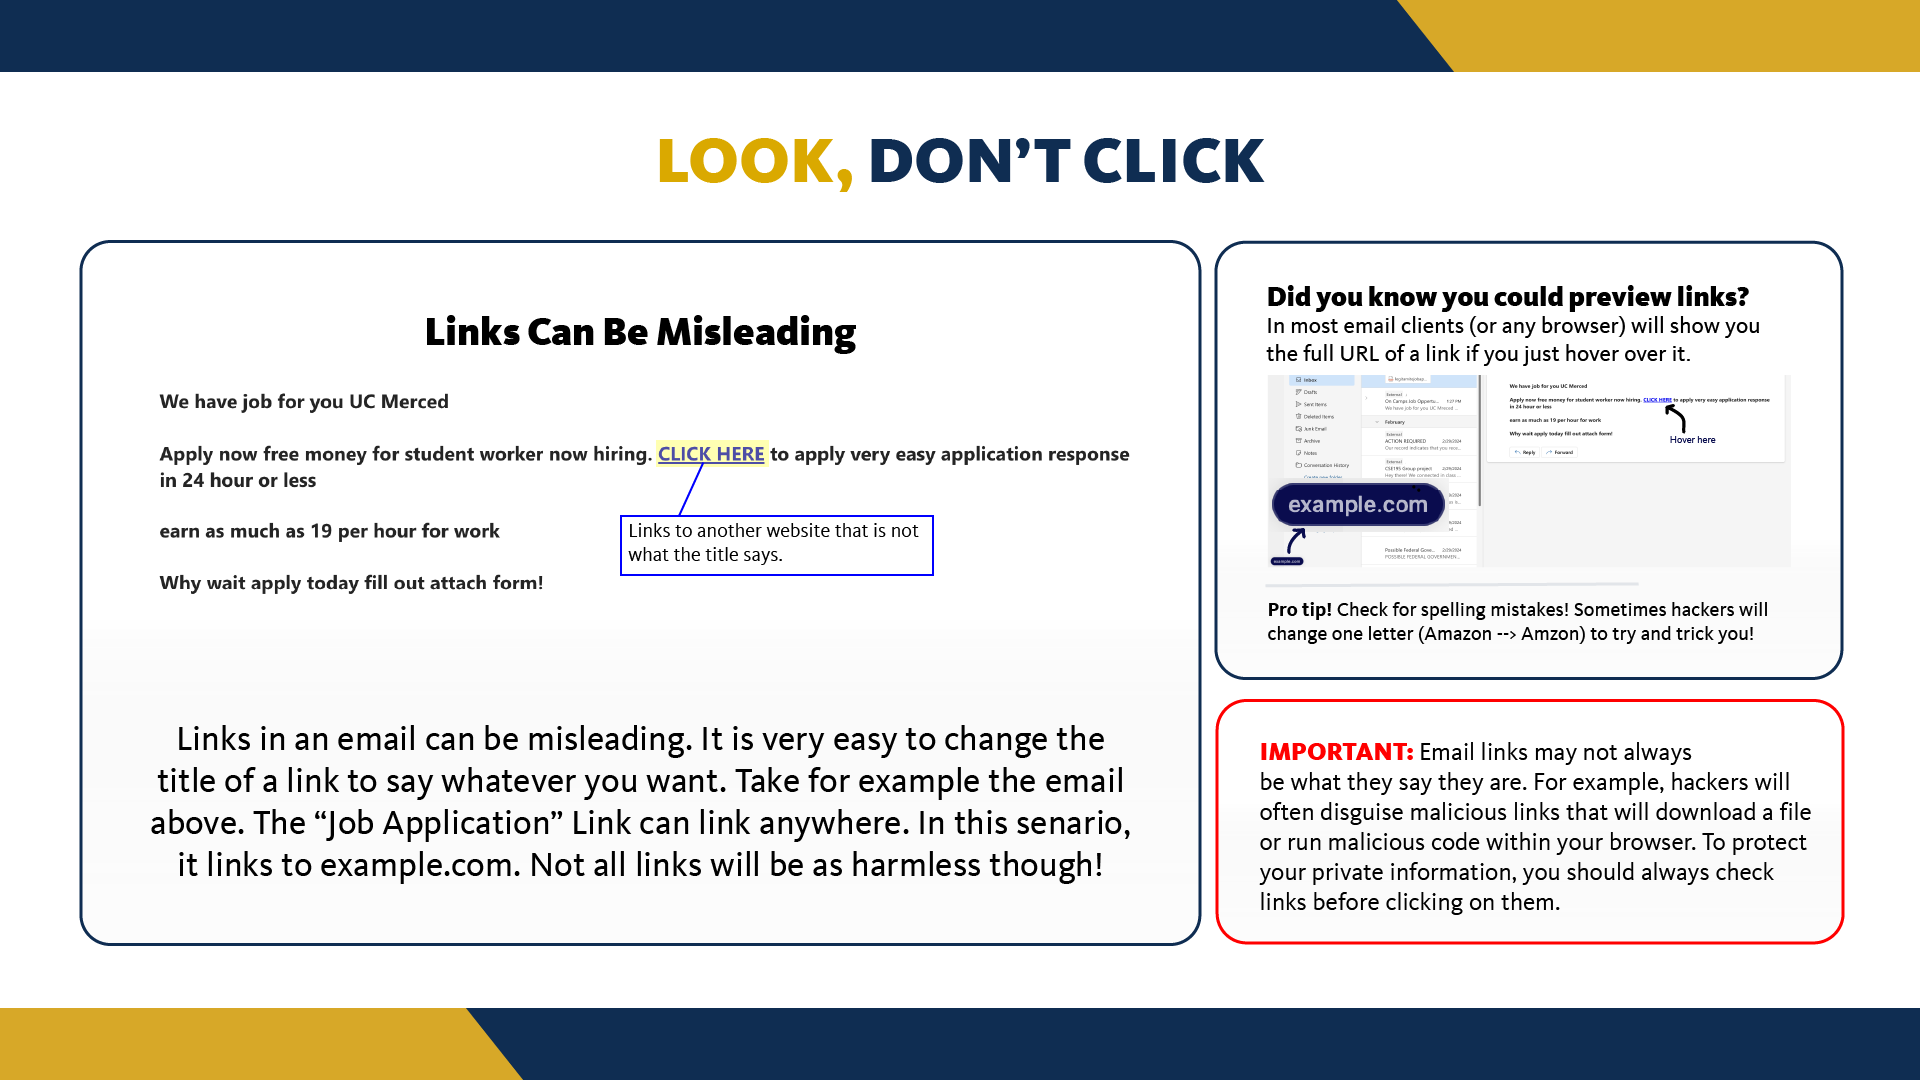 Hackers love to embed malicious links with fake text. A link that says "ucmerced.com" may actually link to a completely different website. To expose this fraud, stop and take time to hover your mouse over the link. Your browser will usually show you the full URL. If the URL matches the title or is linking to a trusted source than you can go ahead and click. NEVER click on a link from an unknown source, without verifying its destination first!